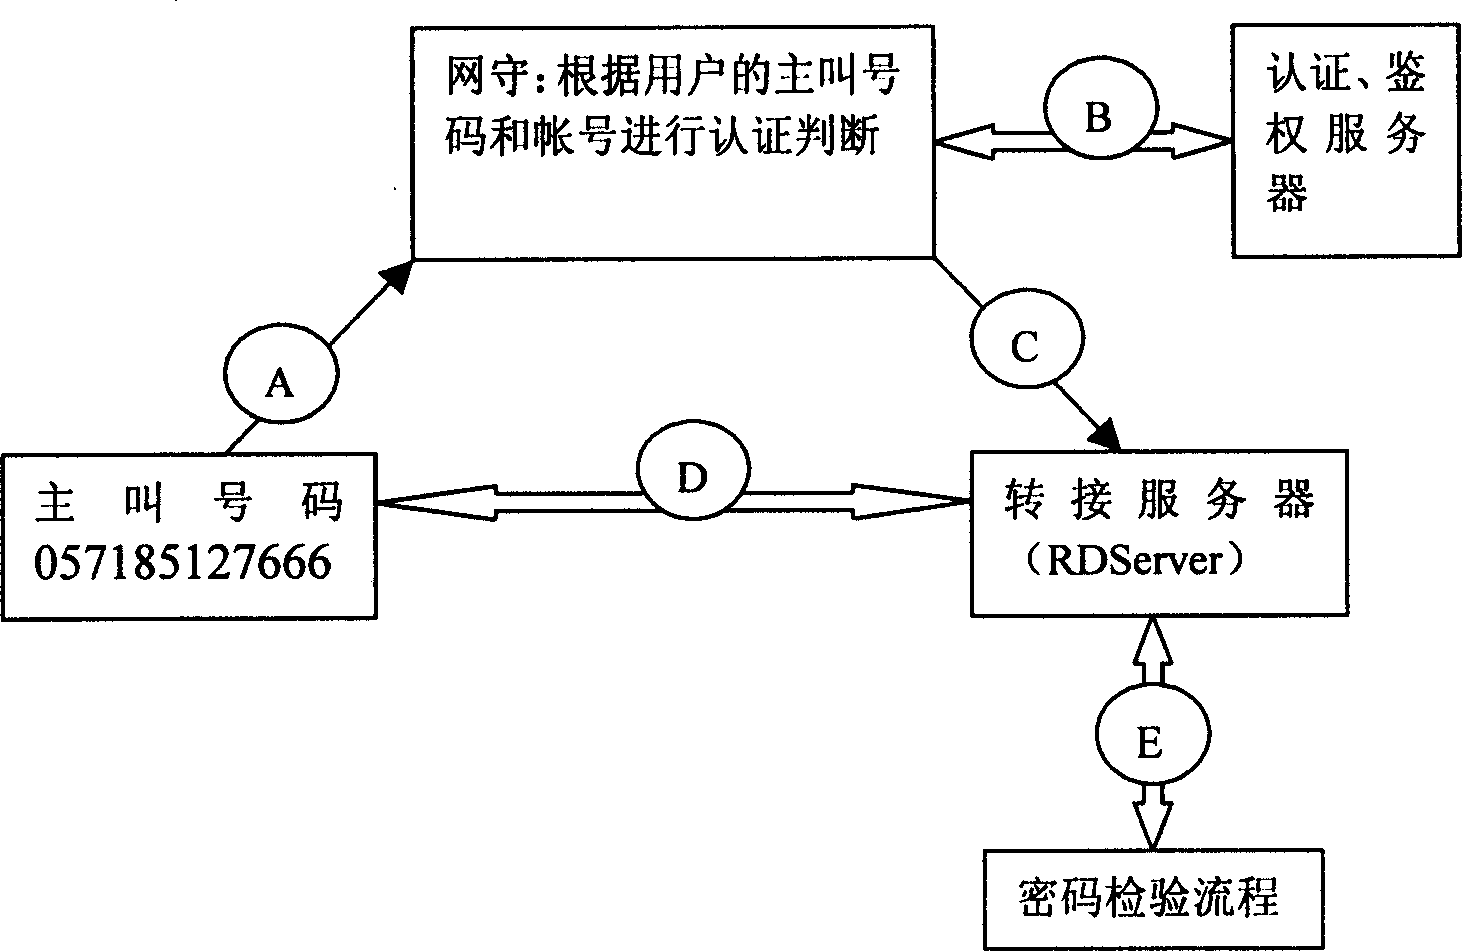 Authentication for dialing number and coding certification combination based on NGN communicating network